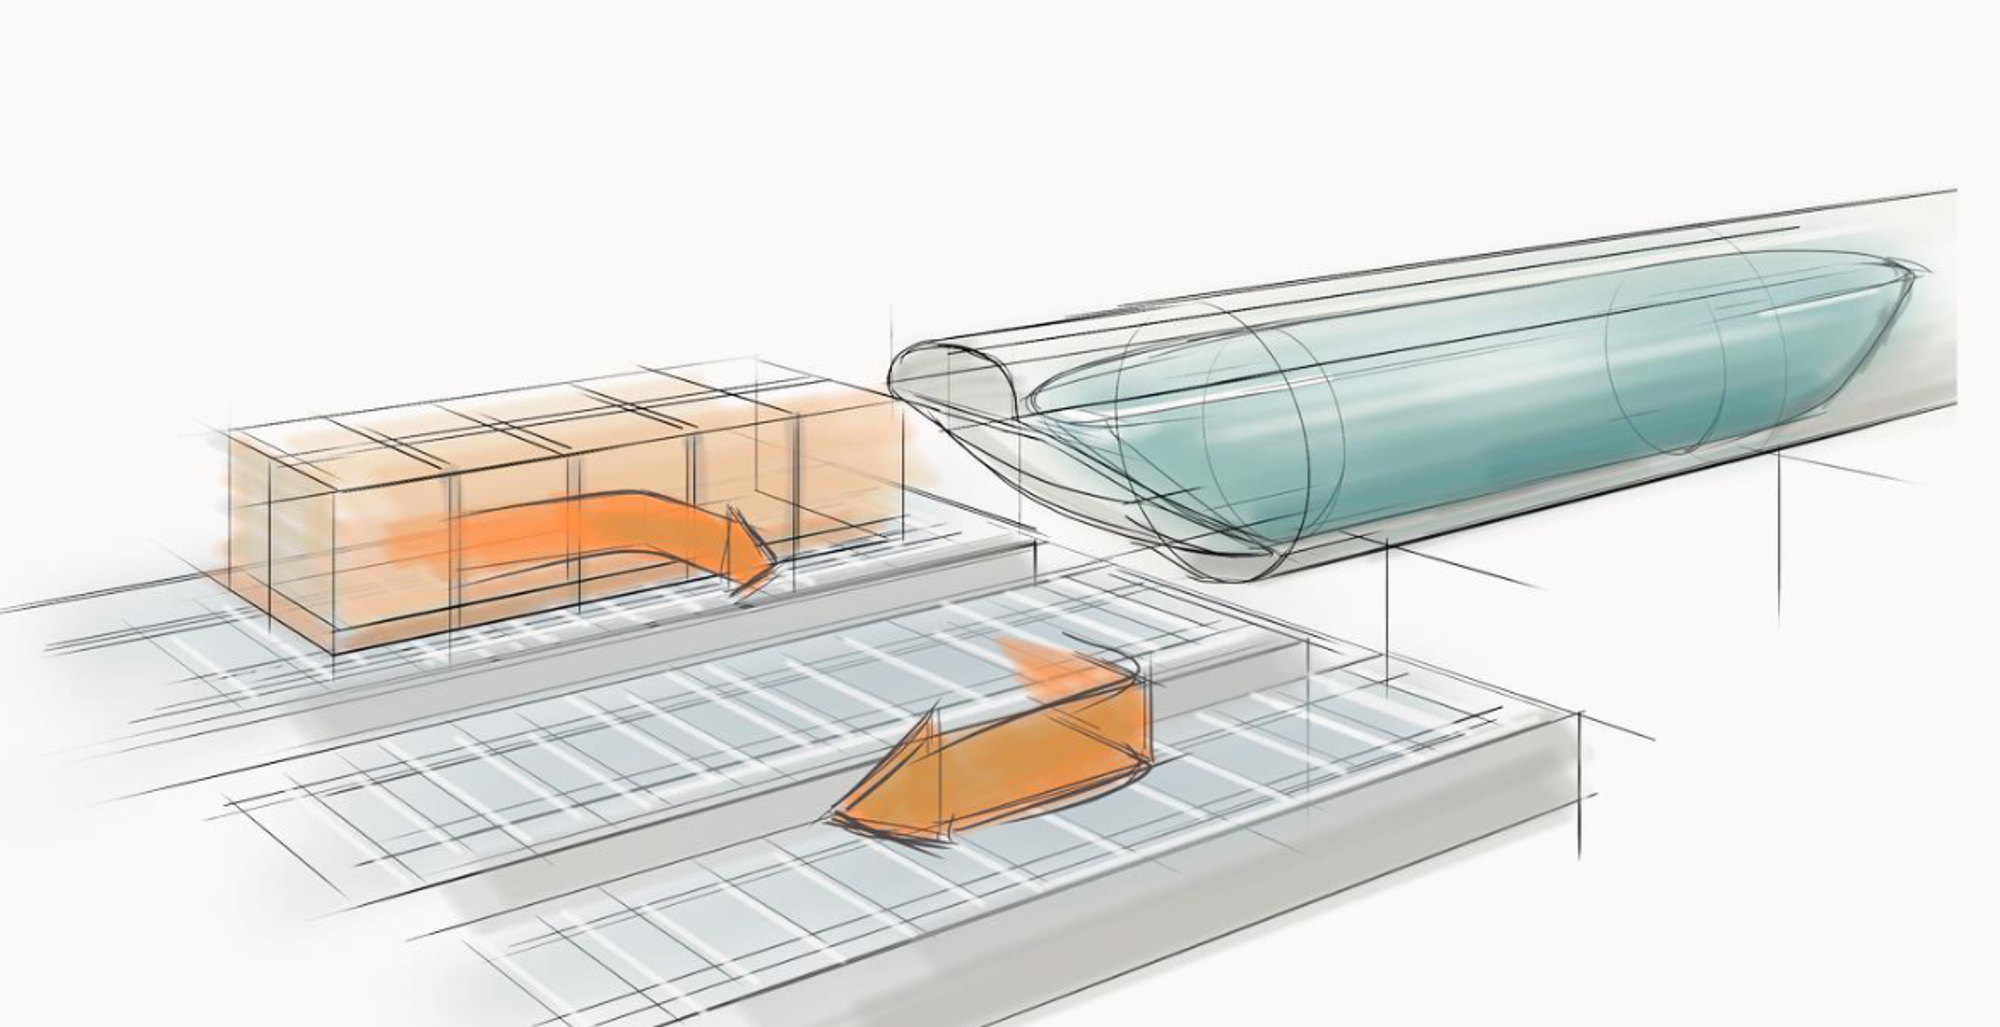 A sketch of the Cargo dock concept including the Cargo Interface Guideway.